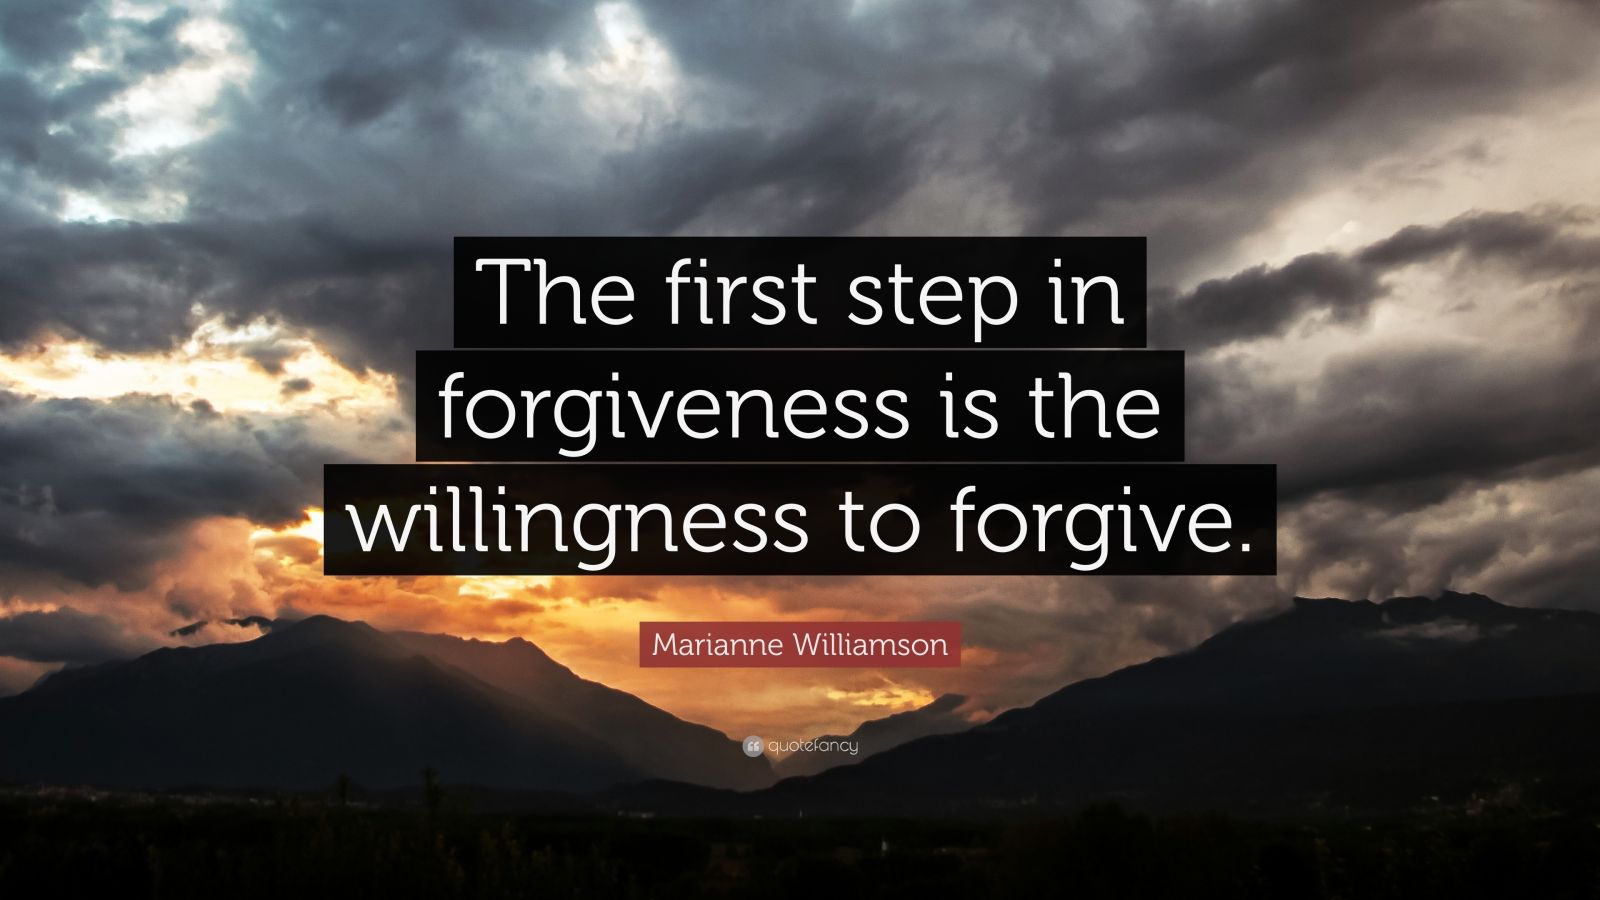 Marianne Williamson Quote: “The first step in forgiveness is the ...